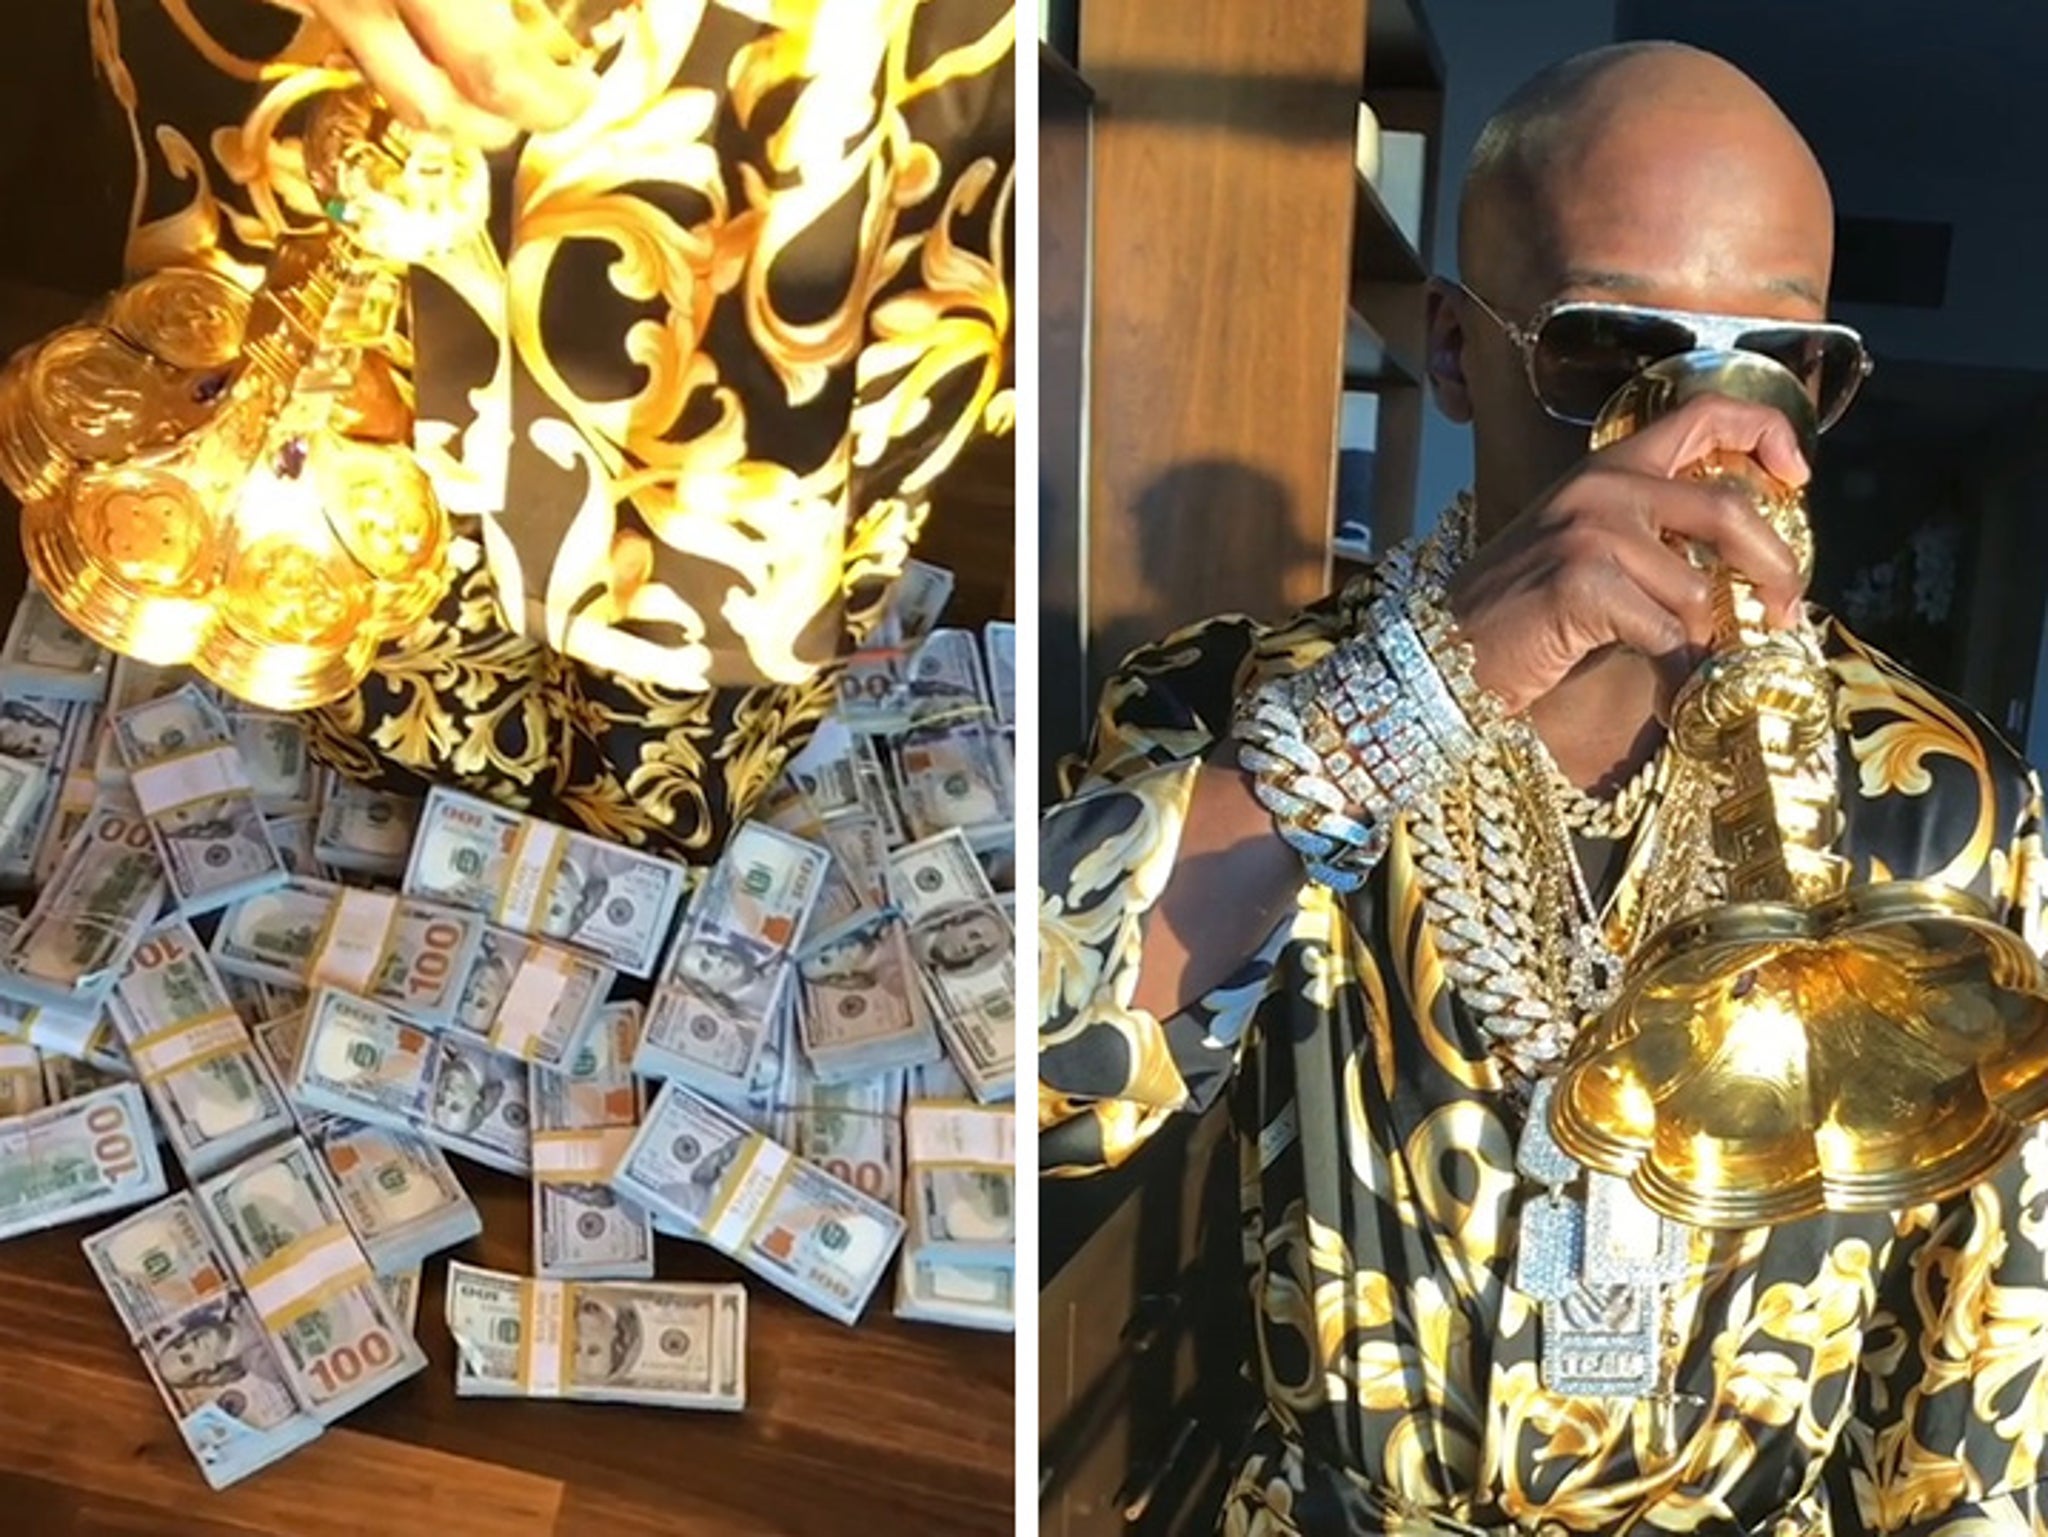 Floyd Mayweather wears 11kg of gold around neck as part of bizarre outfit  at NBA game